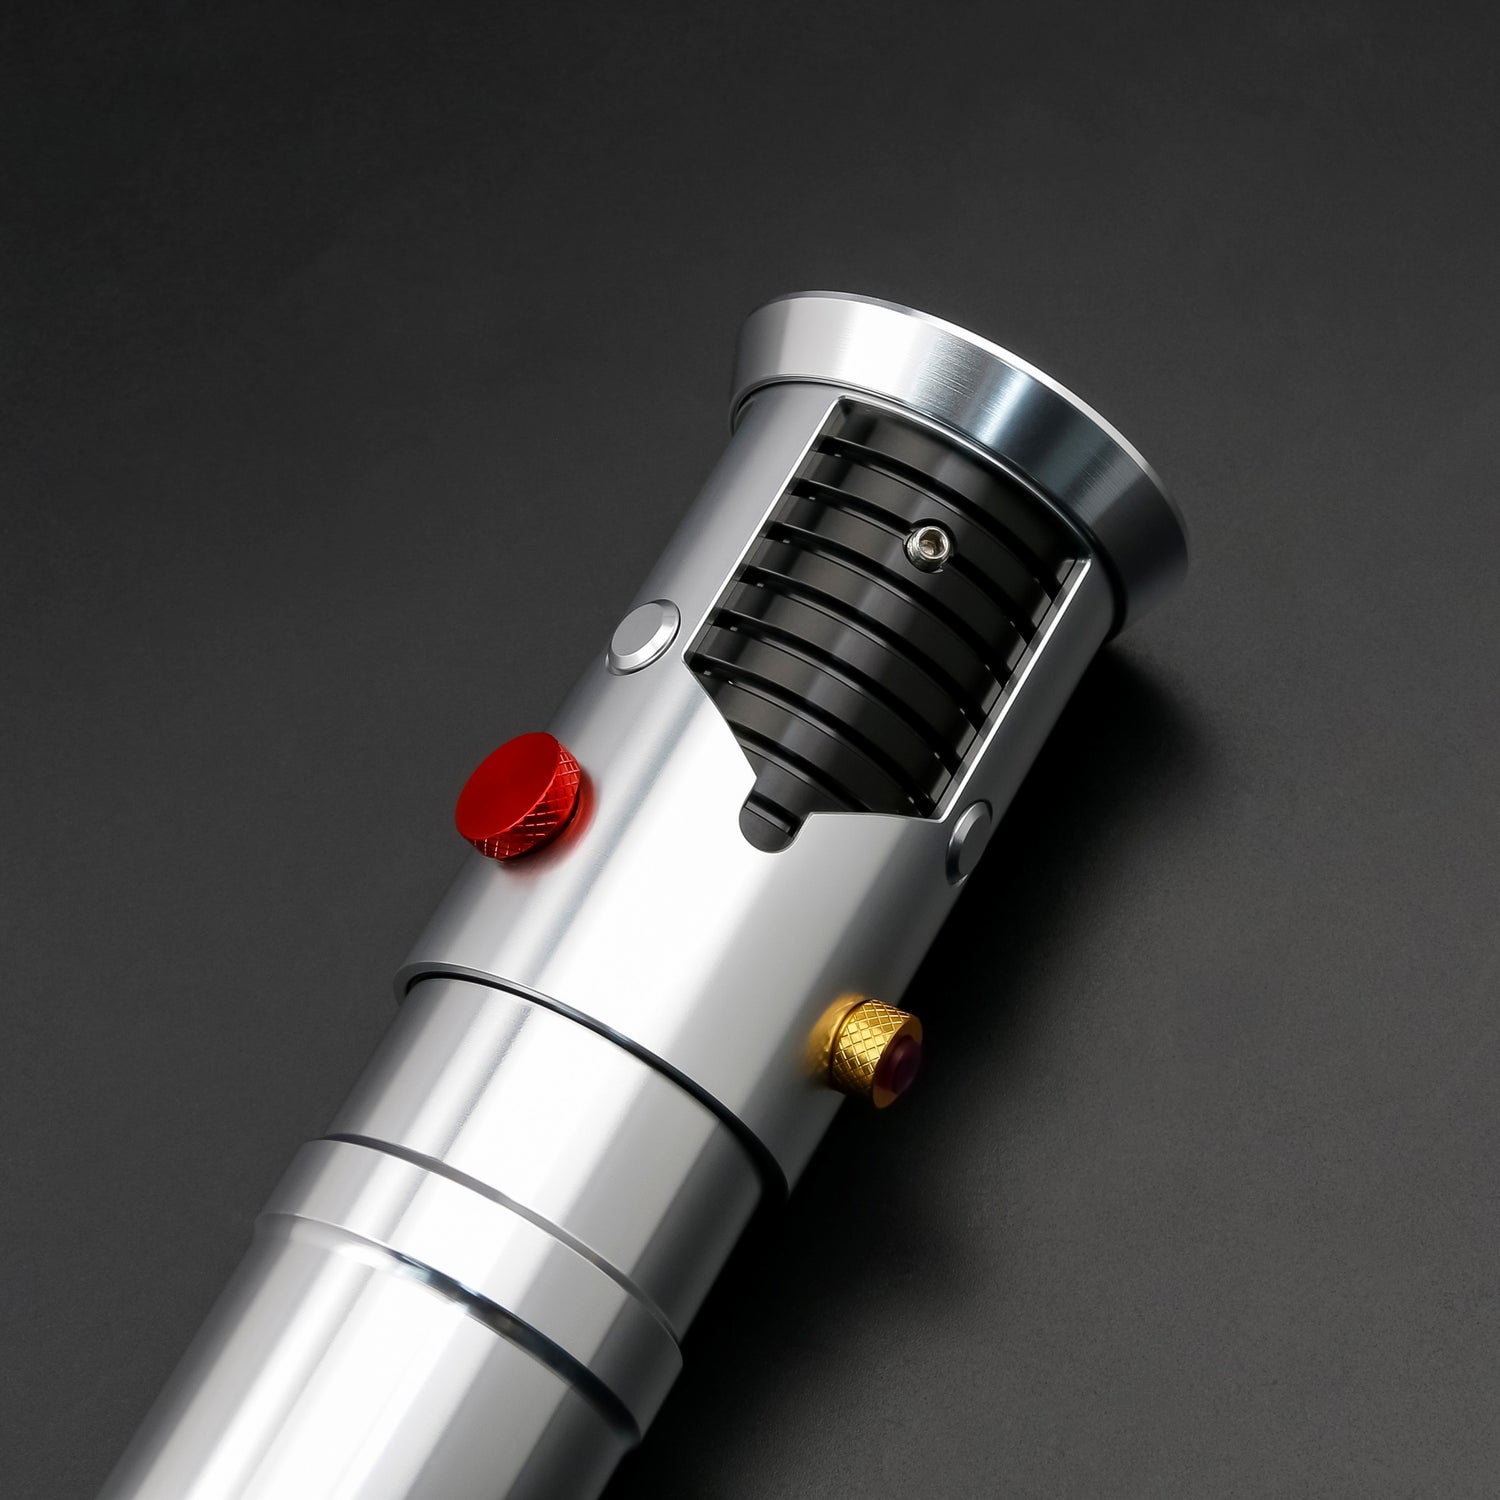 Partial view of Obi Wan Ep1 Lightsaber